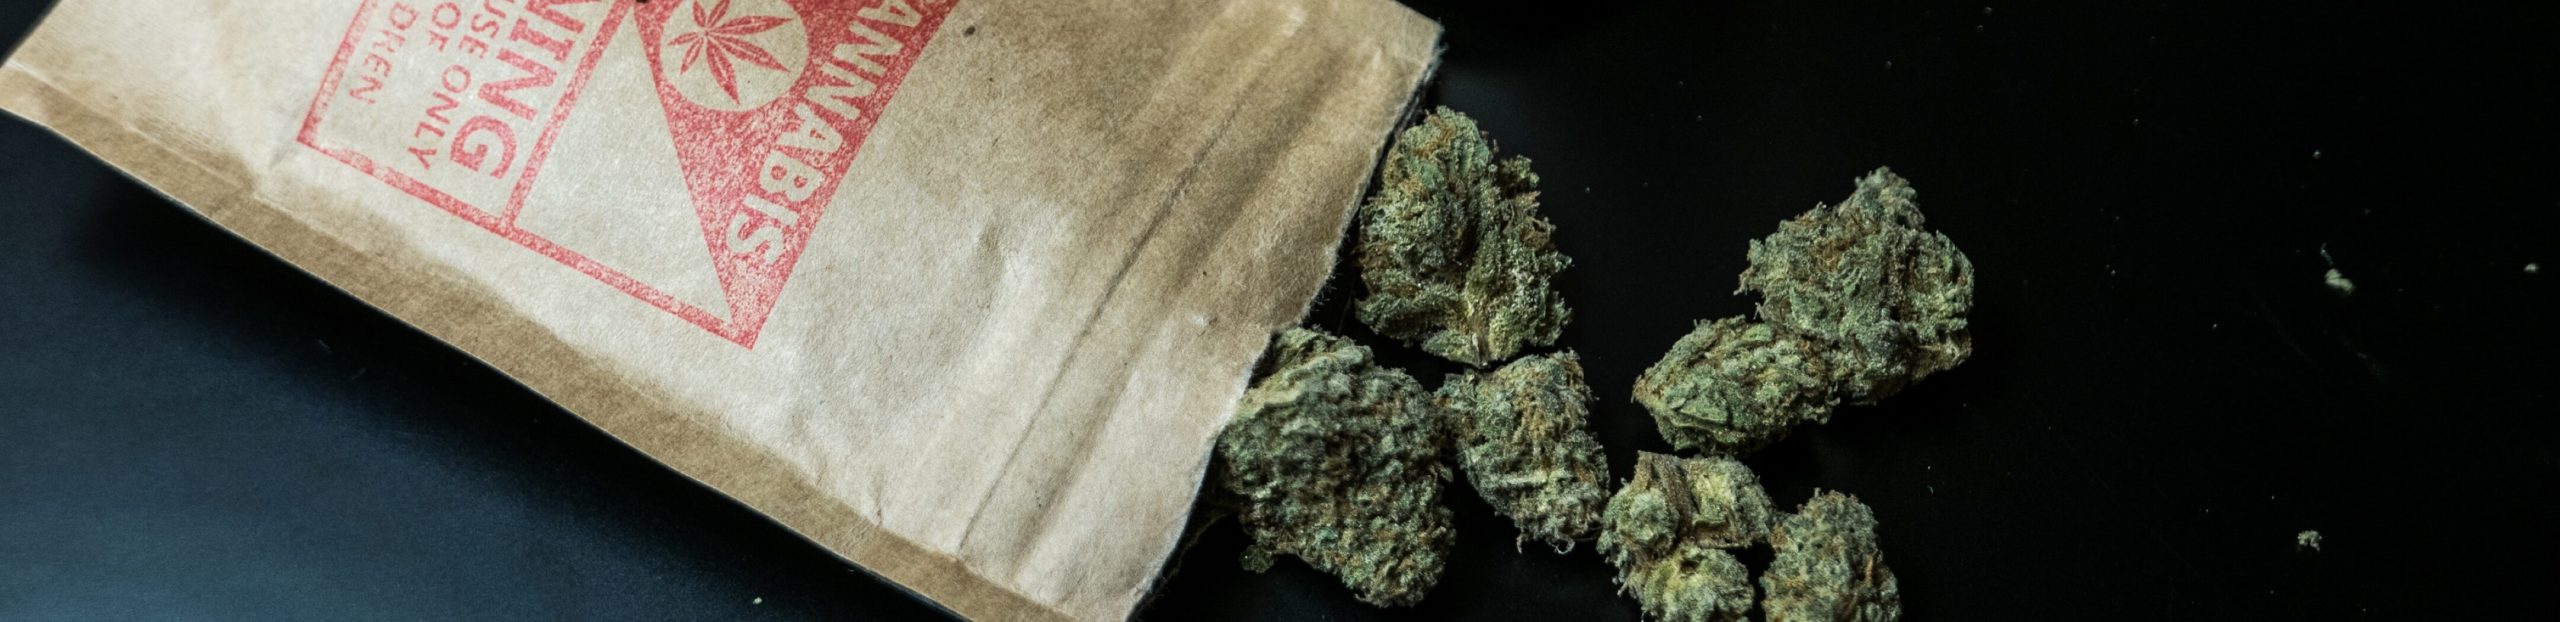 Spectrum Packaging Opened Pouches Displaying Marijuana Nuggets on Black Table